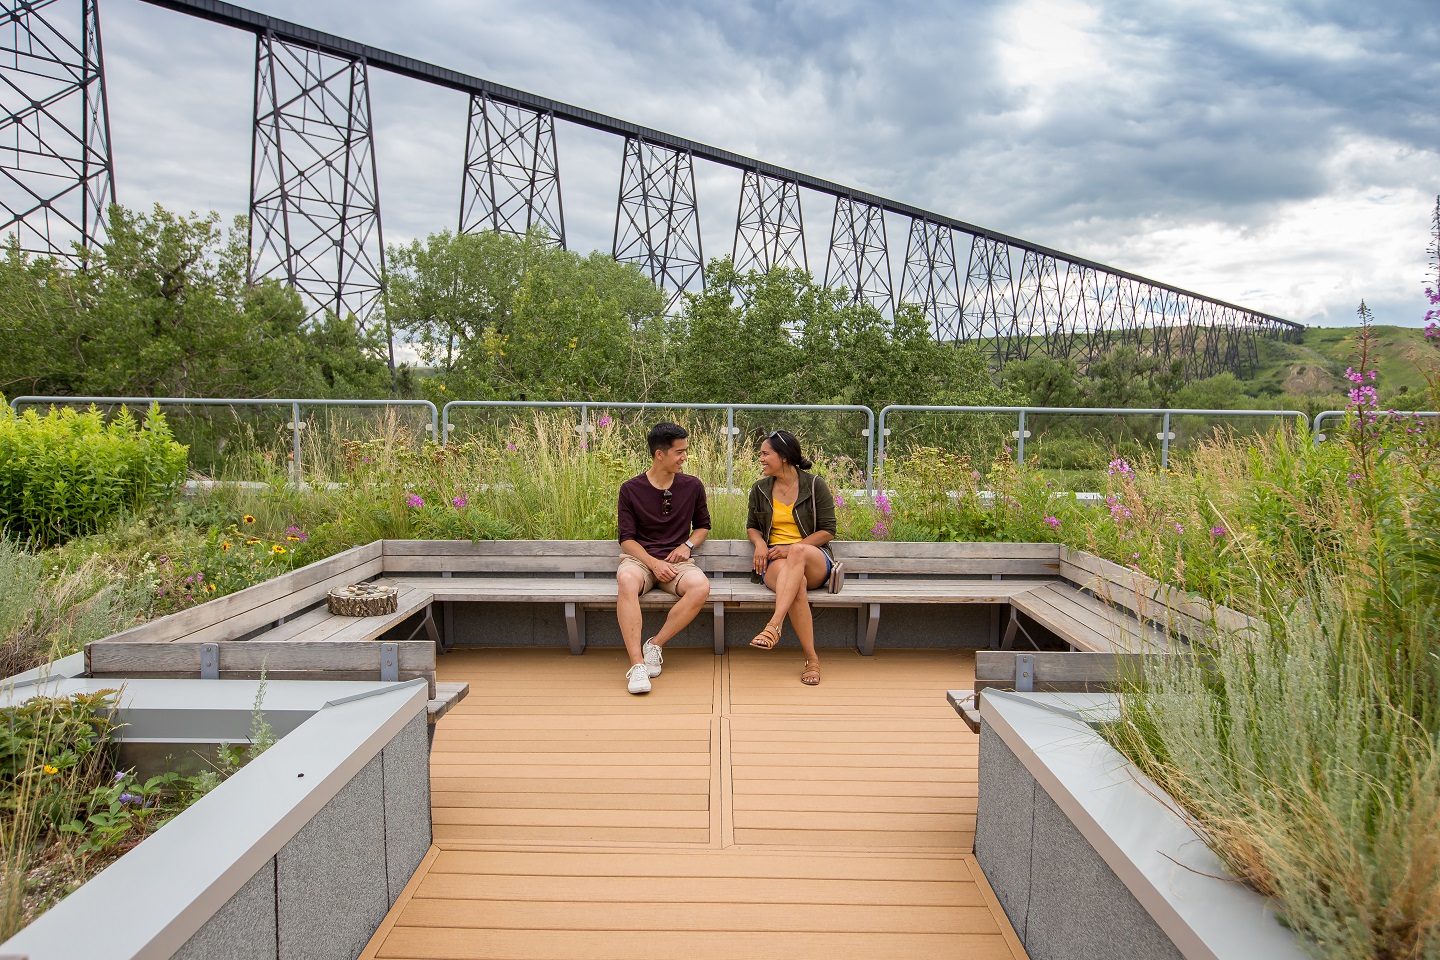 Two people sit on a bench surrounded by plants, with a railway bridge in the background.